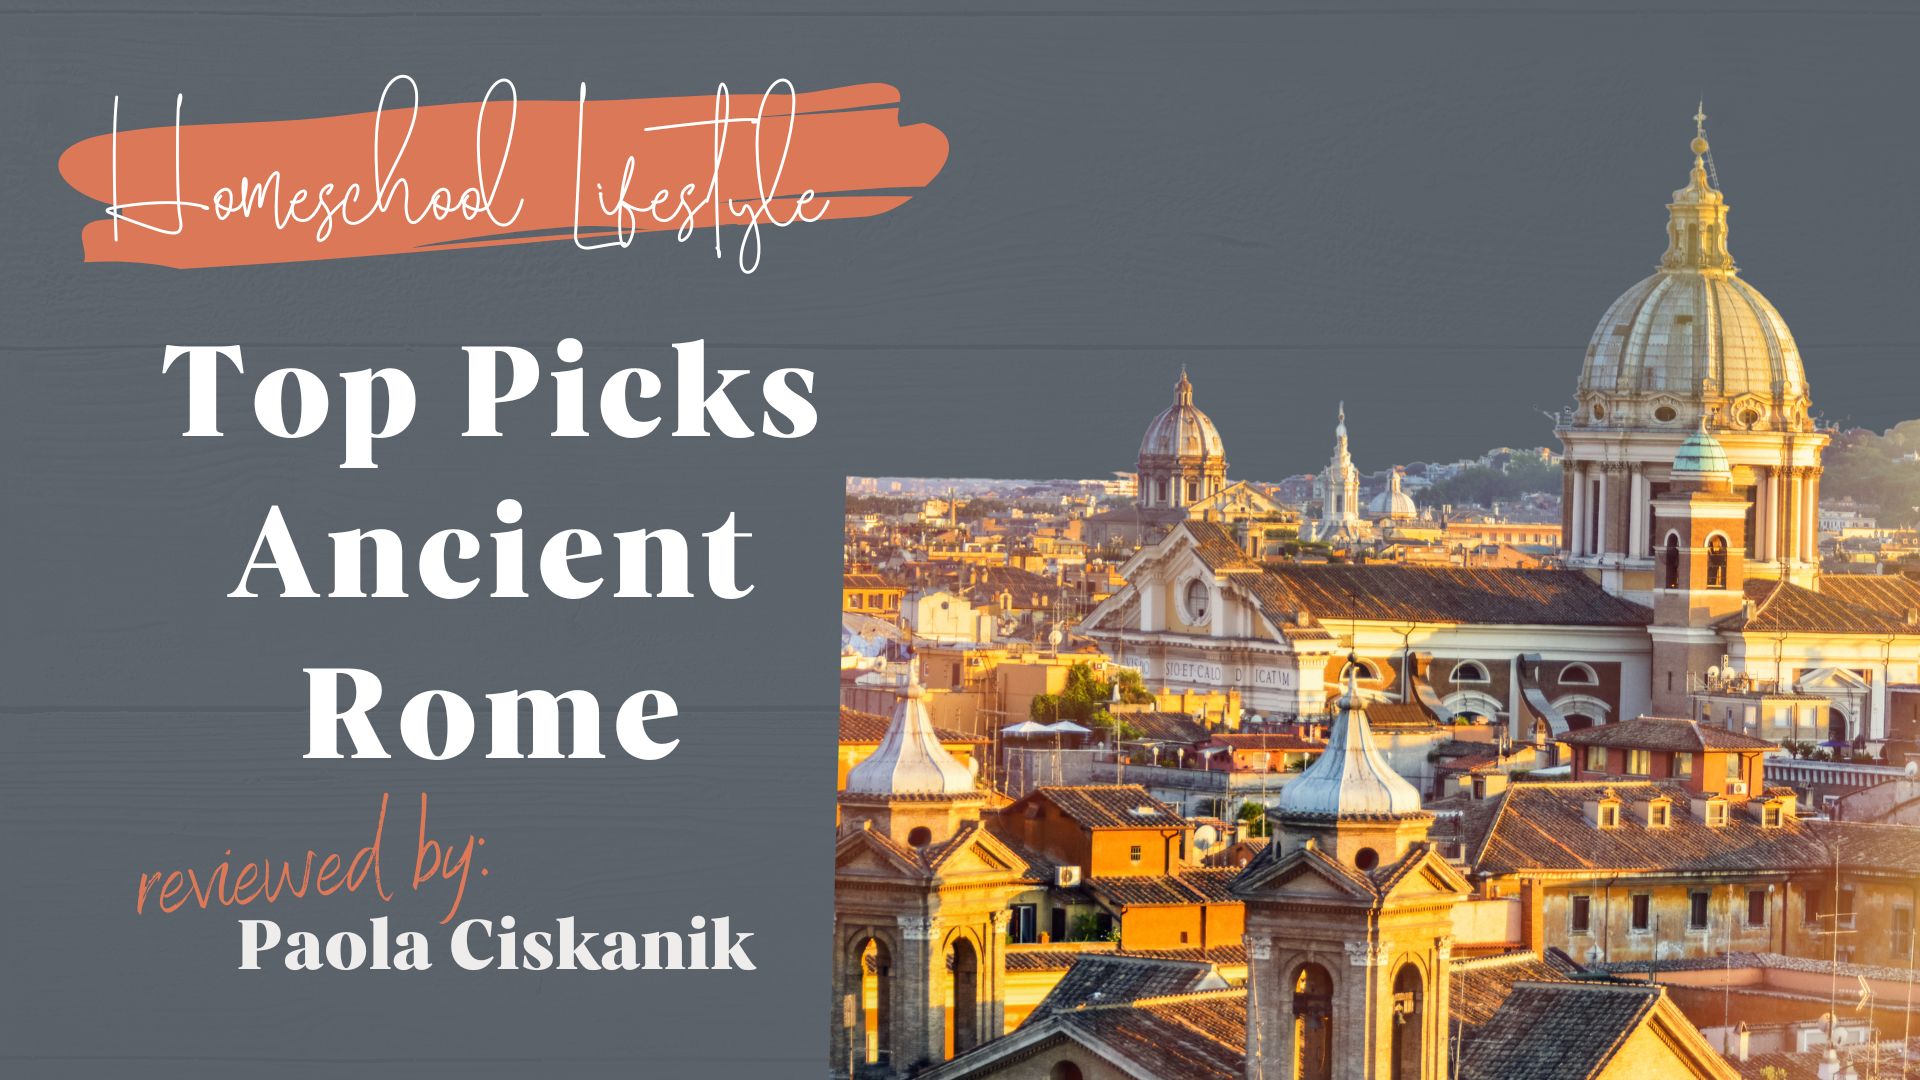 Top Picks for ANCIENT ROME